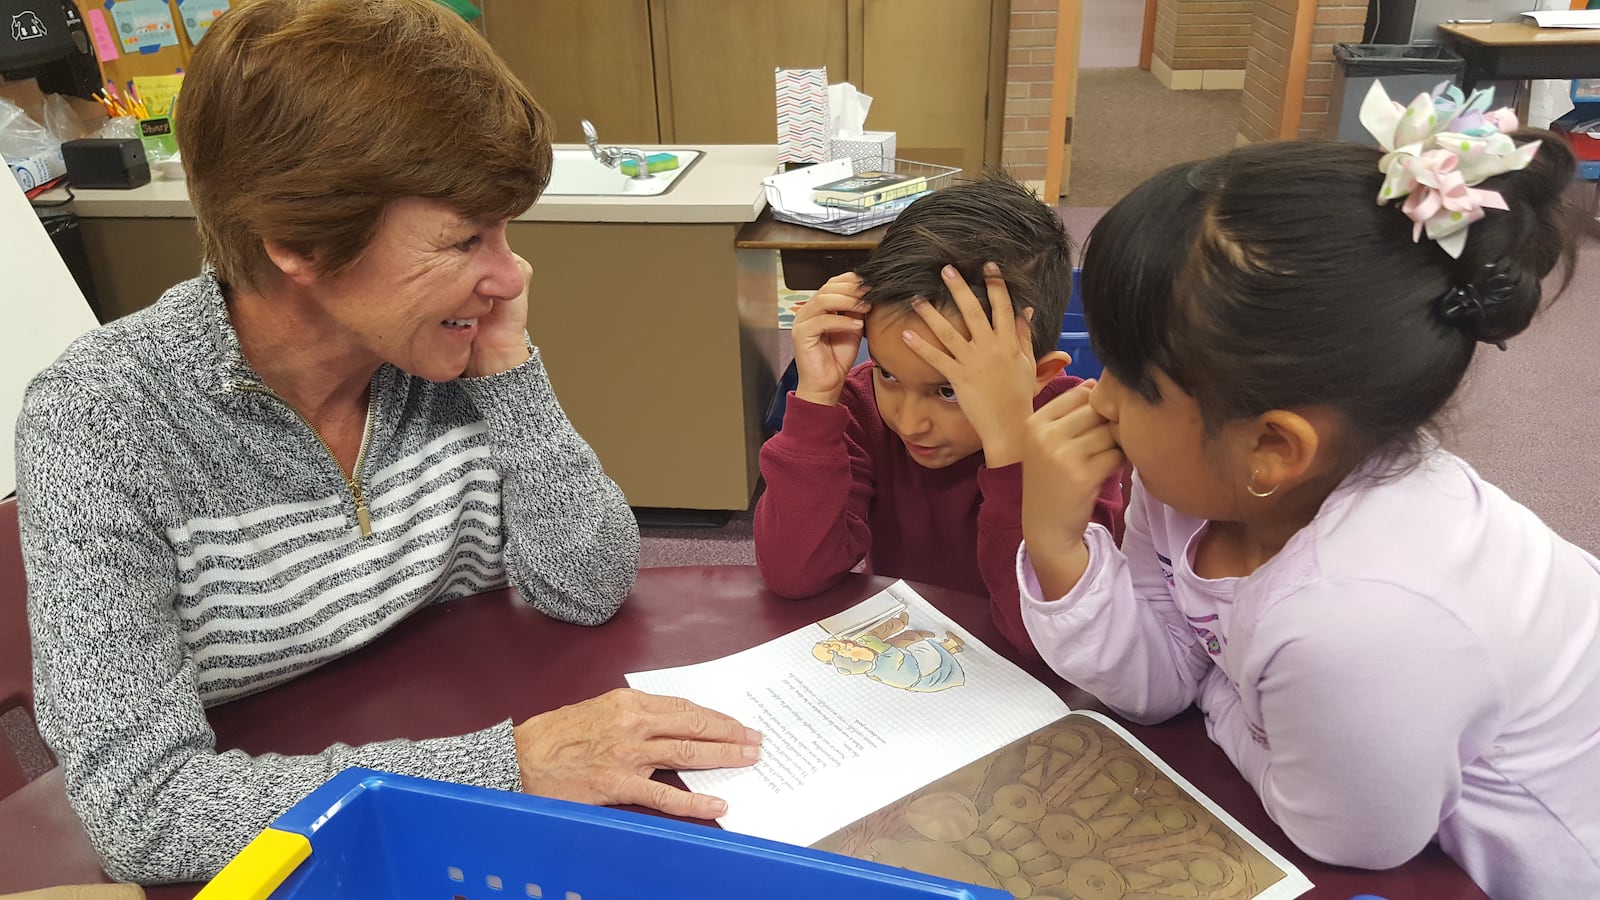 Volunteer Cindy Stechmeyer reads with two second graders during reading club at Lumberg Elementary in Edgewater.